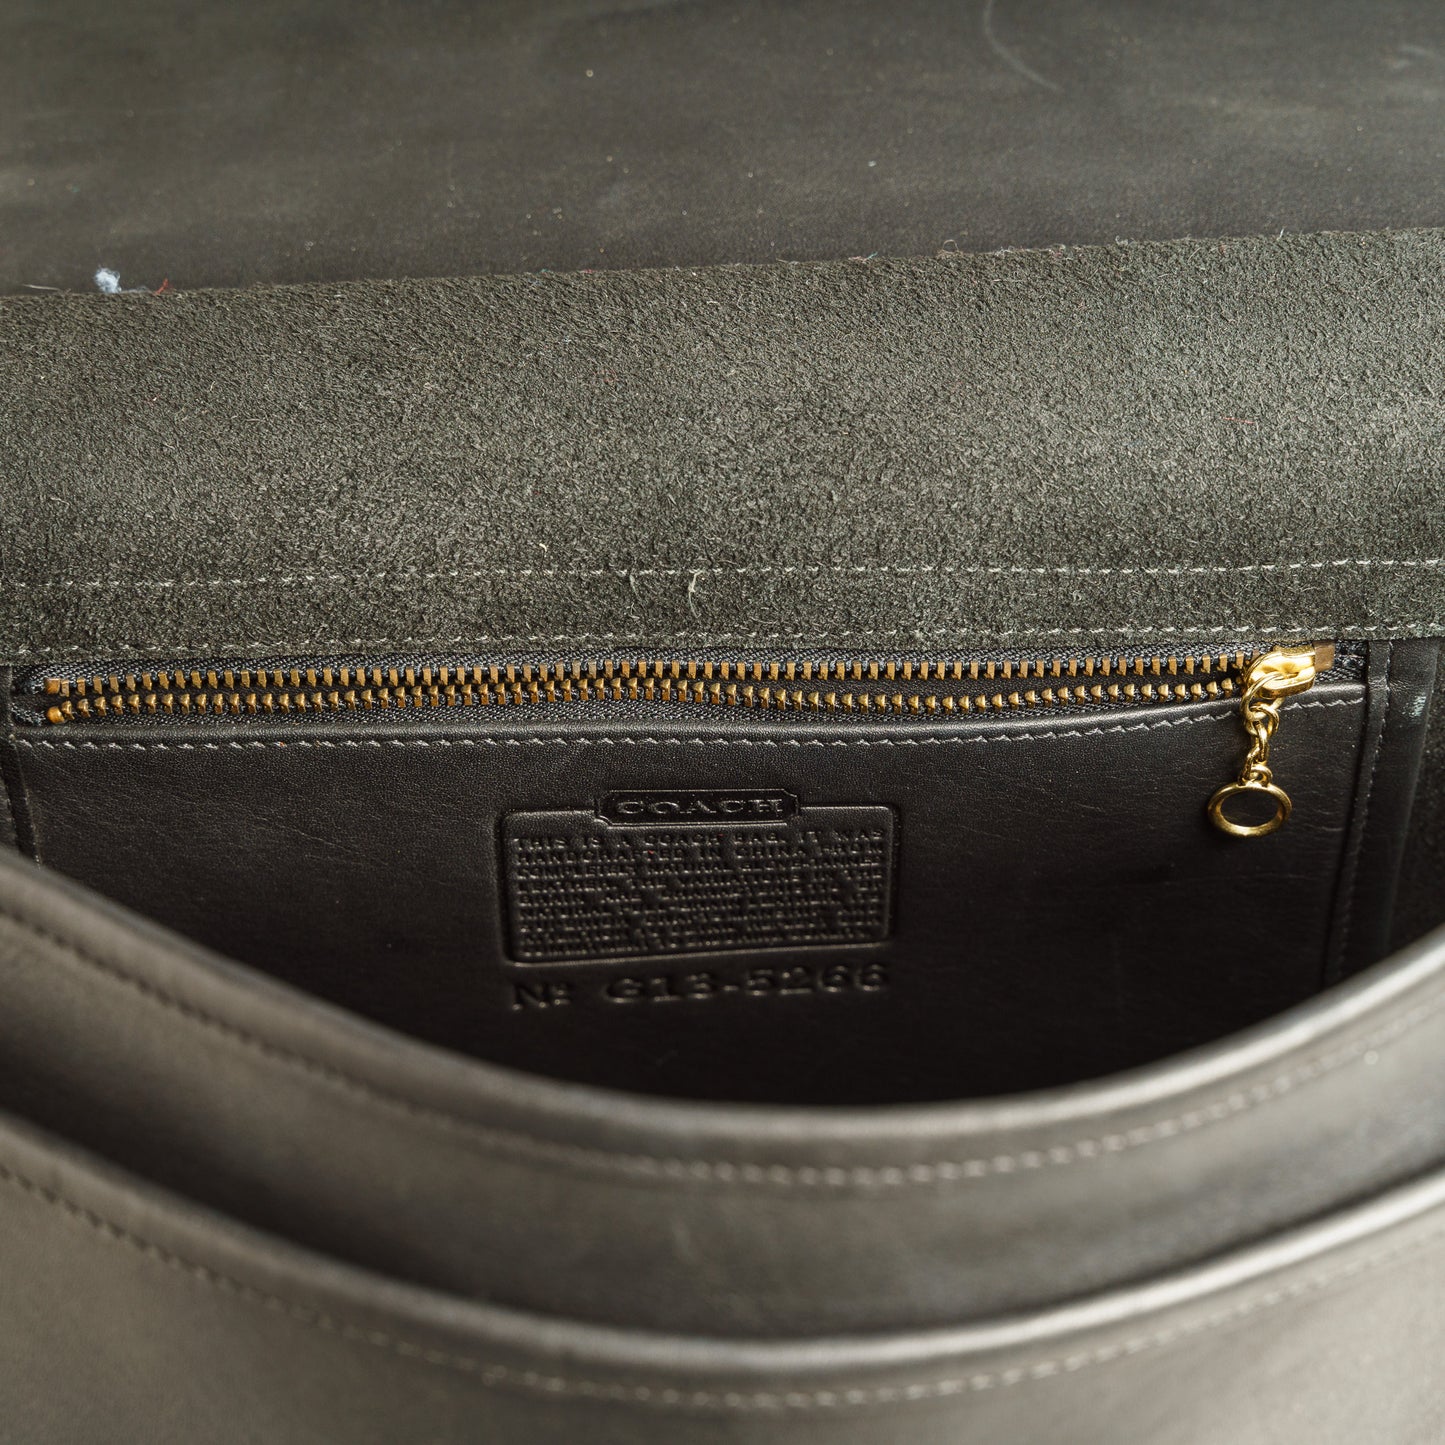 Leather Coach Briefcase - Monogrammed